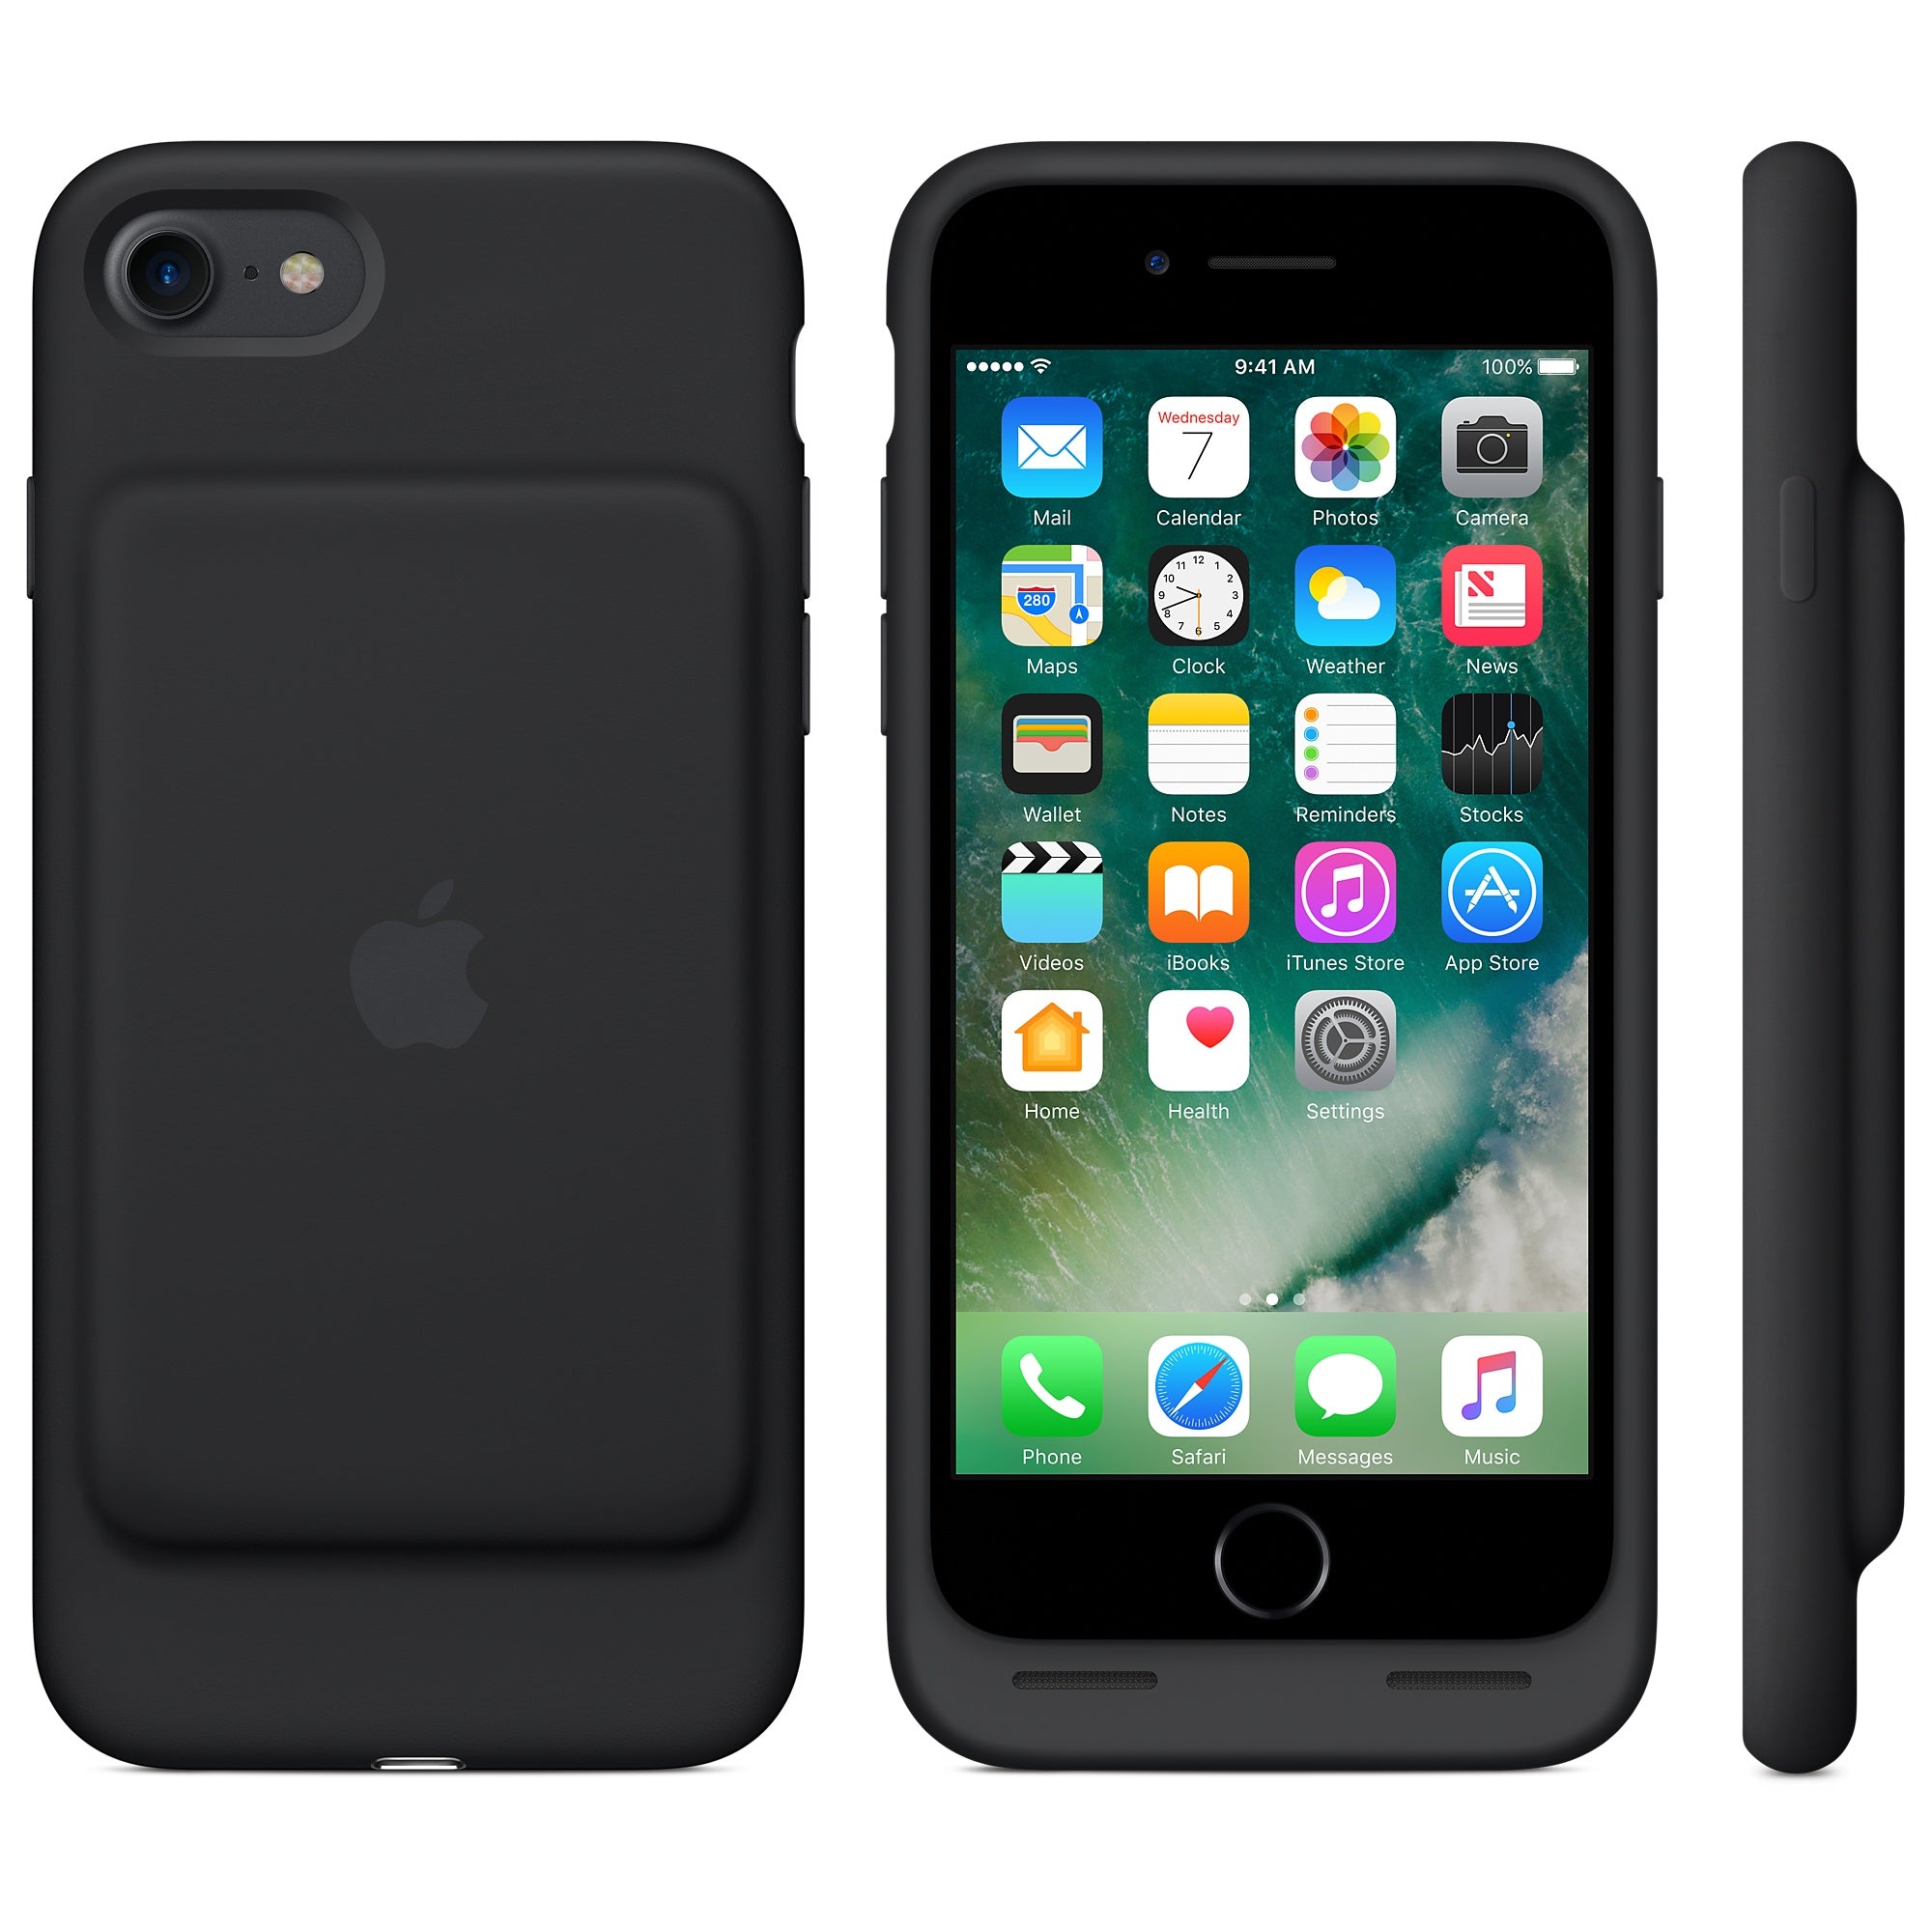 Distil Union's review of Battery Case for iPhone from Apple